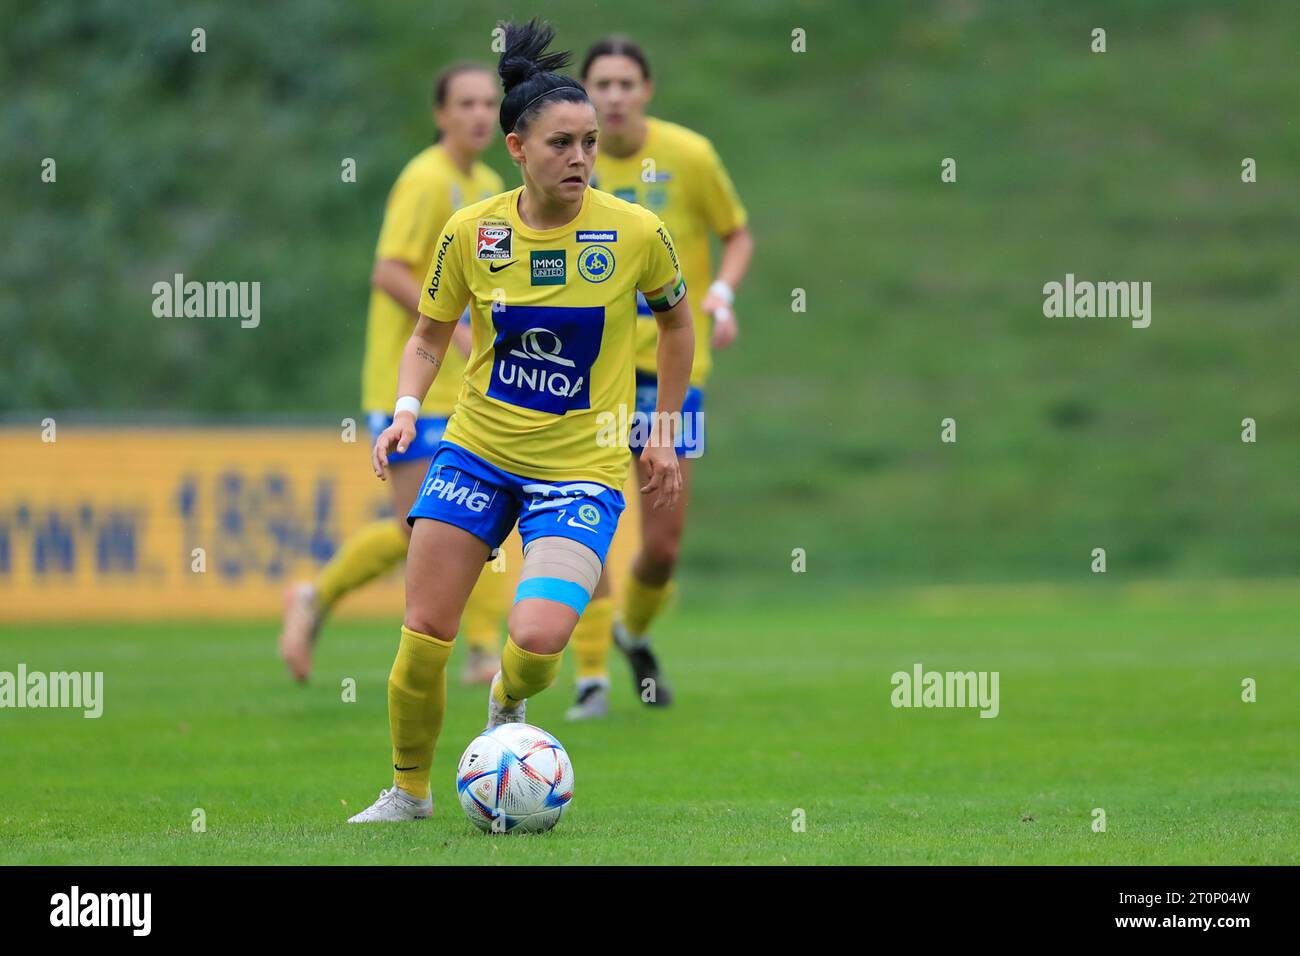 Claudia Wasser (7 First Vienna FC) in action during the Admiral Frauen Bundesliga match First Vienna FC vs SCR Altach at Hohe Warte  (Tom Seiss/ SPP) Stock Photo